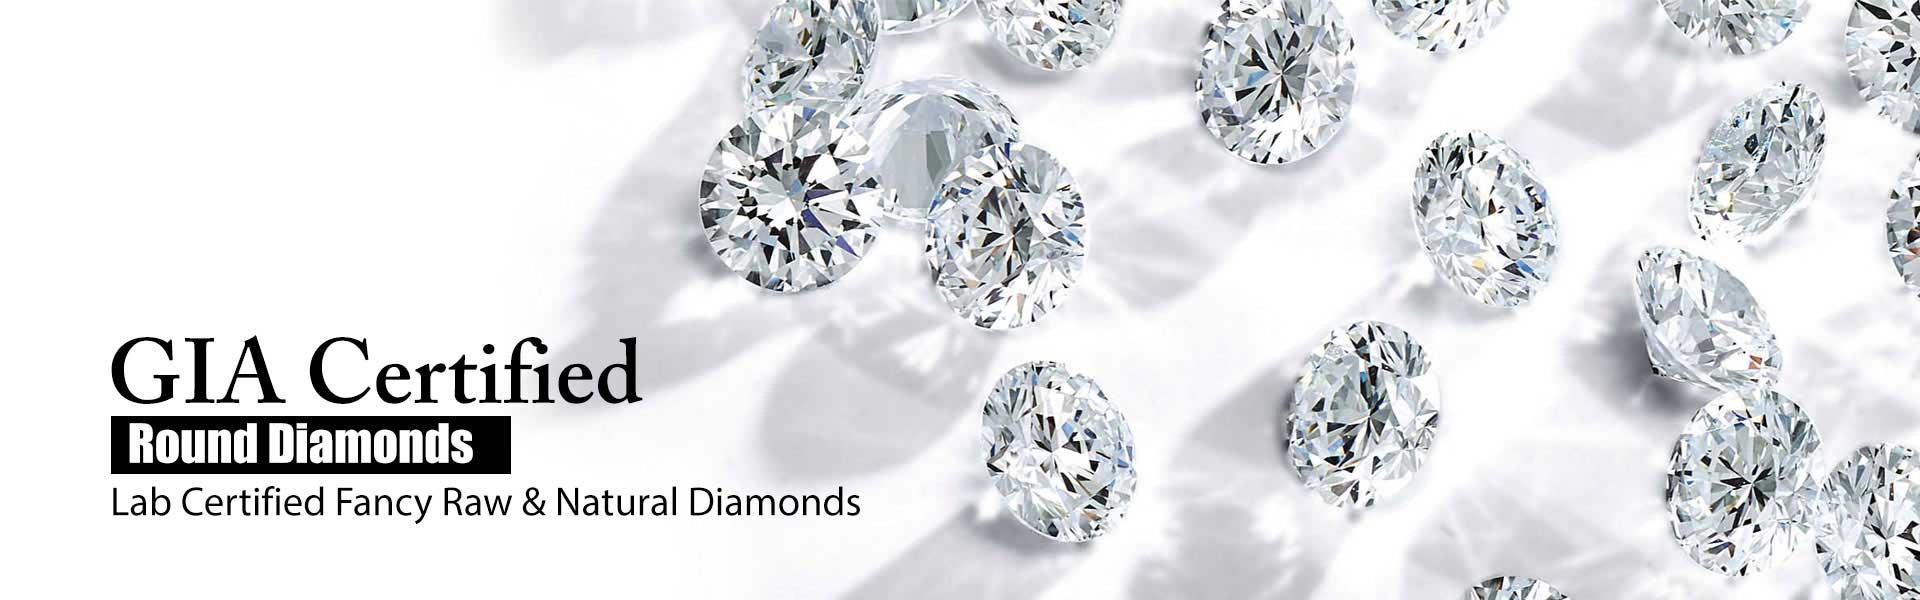  Certified Diamond  Manufacturers in South Africa